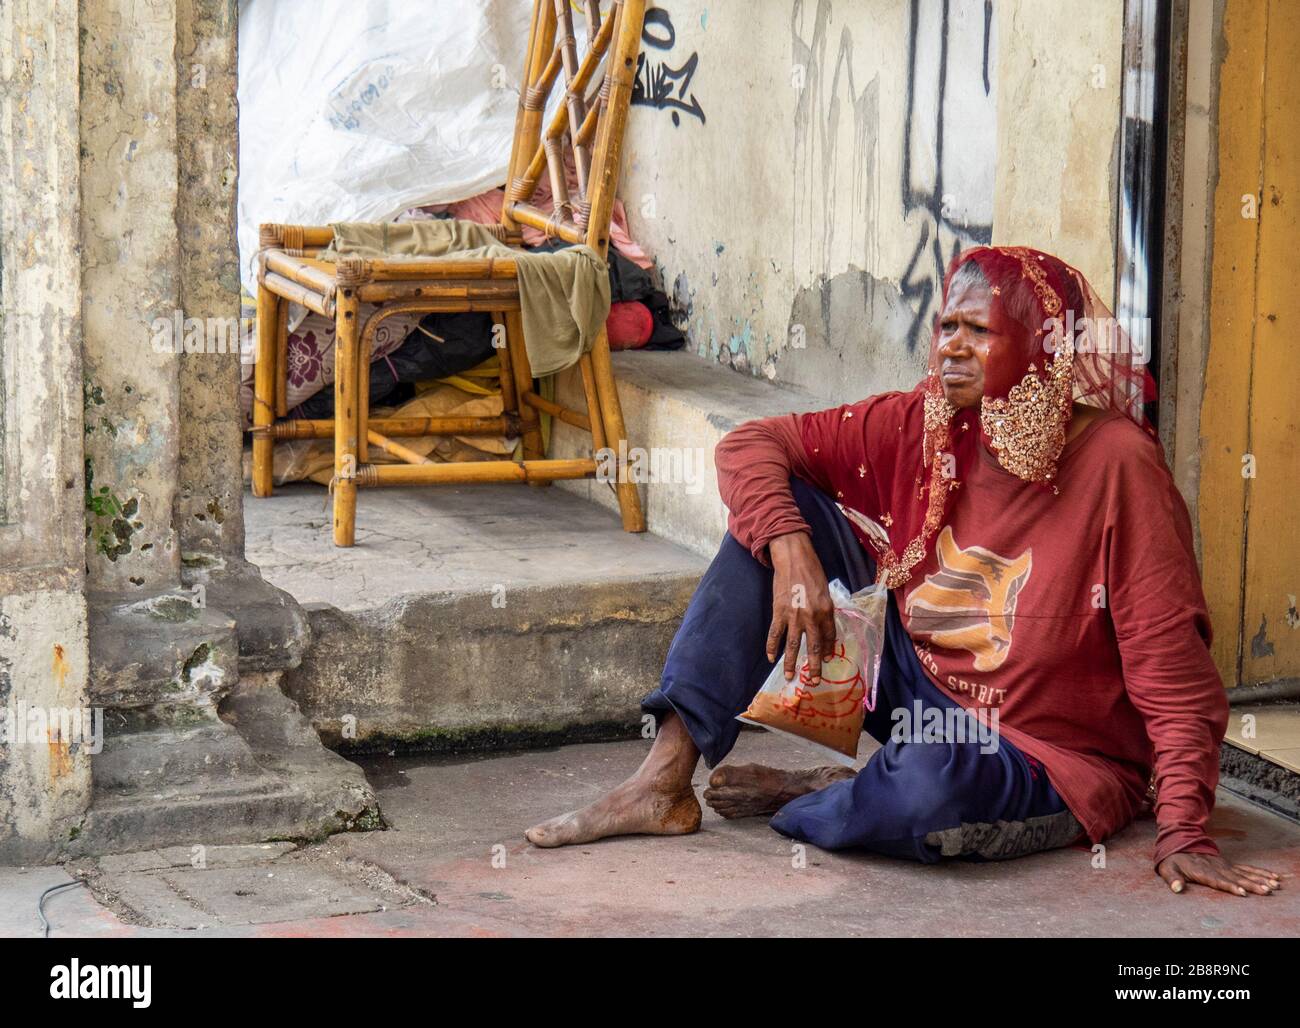 Middle age woman sitting on the pavement  in front of her home in Chinatown Kuala Lumpur Malaysia. Stock Photo